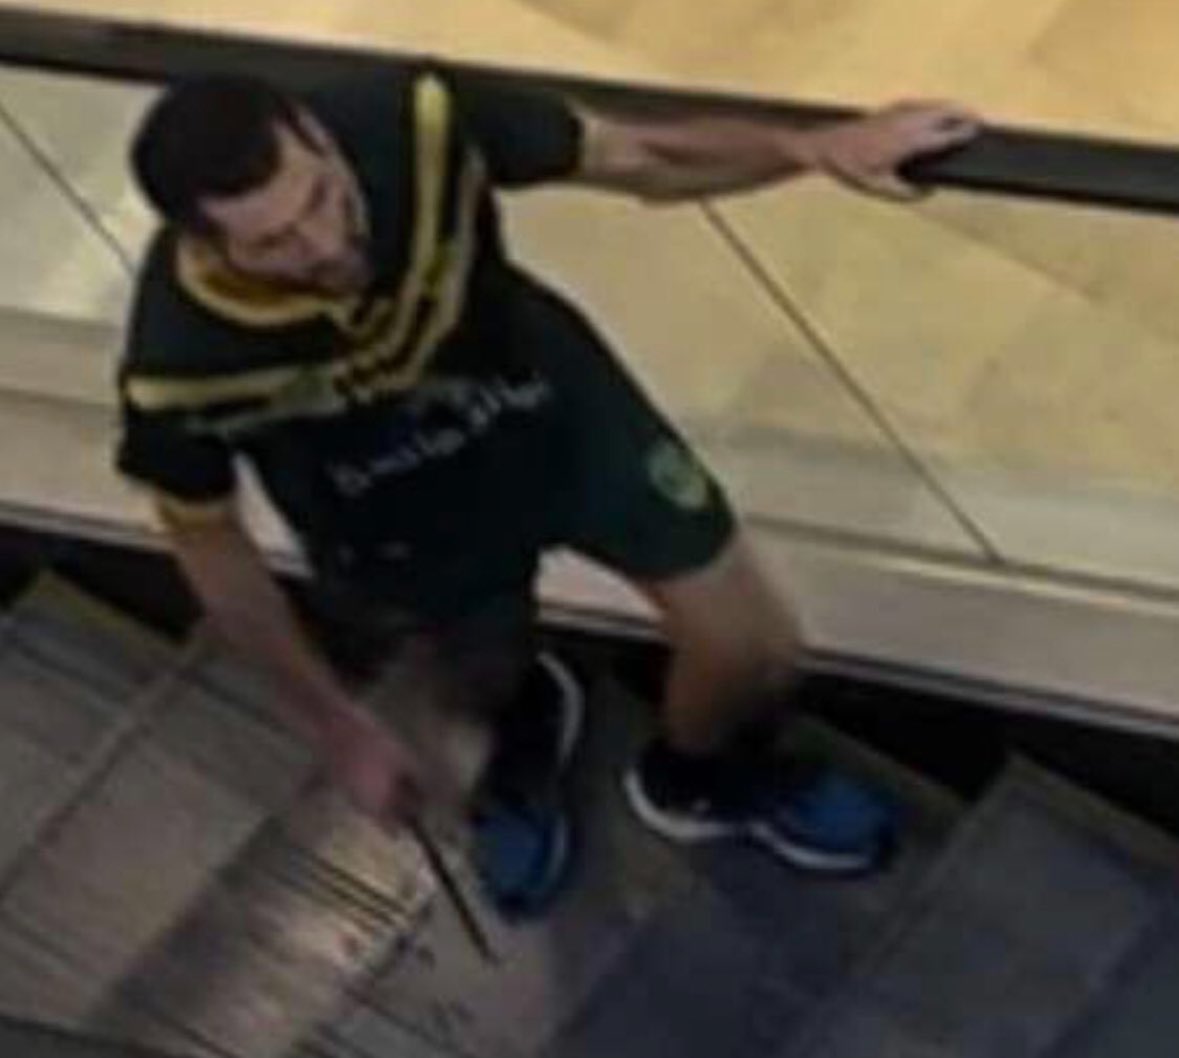 This is the man that stabbed 5 women and 1 man to death in a shopping mall in Sydney. He was already ‘known to law enforcement’ prior to the attack. A baby is currently in critical condition and undergoing surgery at a hospital after being stabbed by this man.